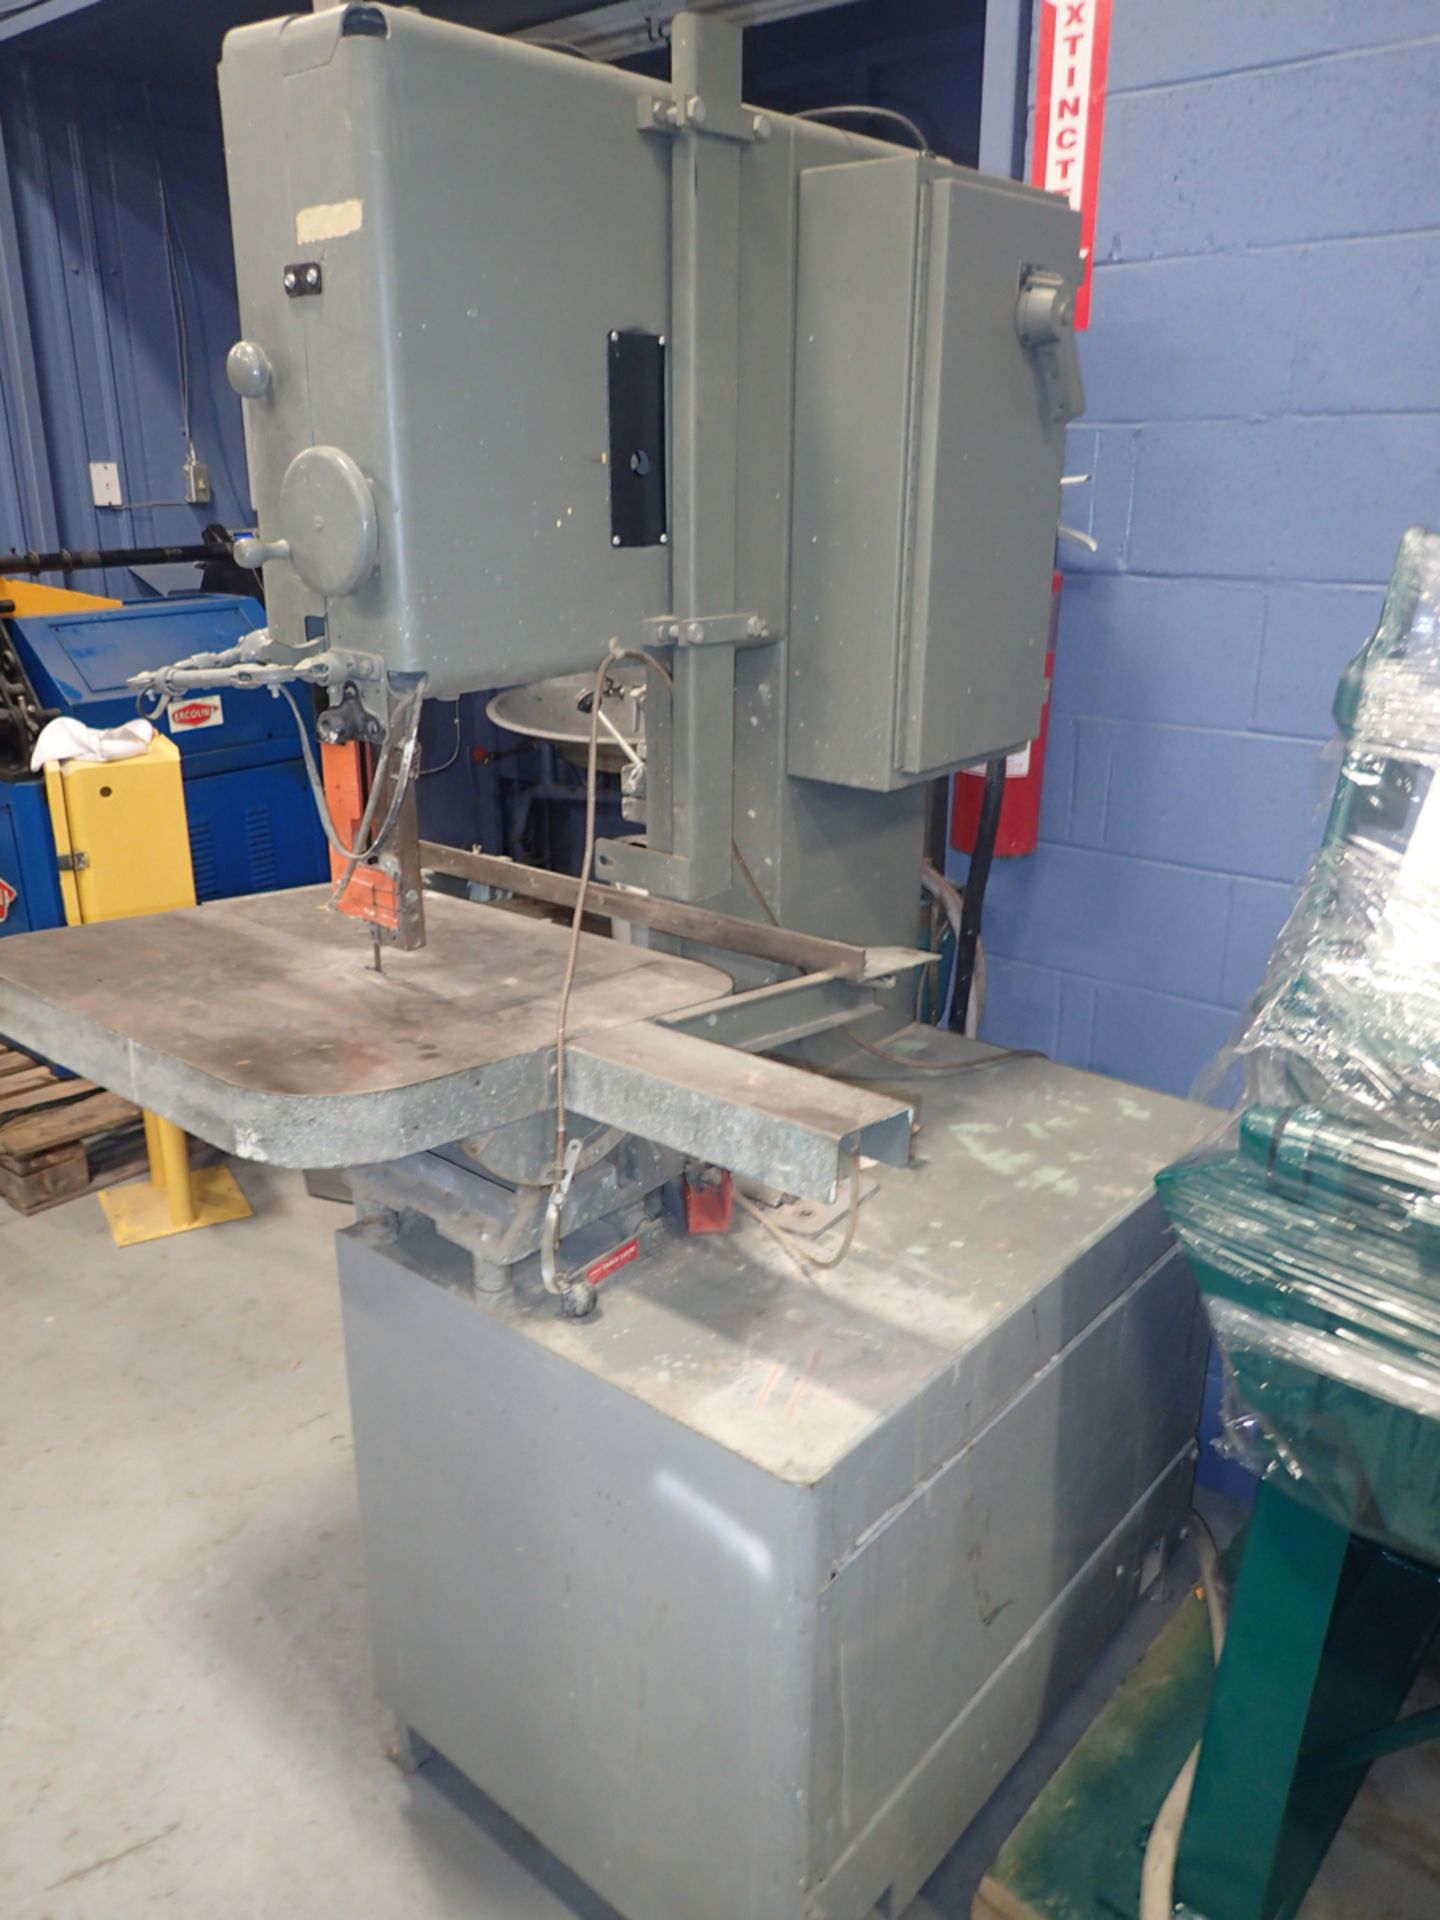 GROB VERTICAL BAND SAW MOD. 4V18, 18" CAP, BLADE WELDER, VARIABLE SPEED 40-5000 RPM, 575 VOLTS - Image 3 of 4